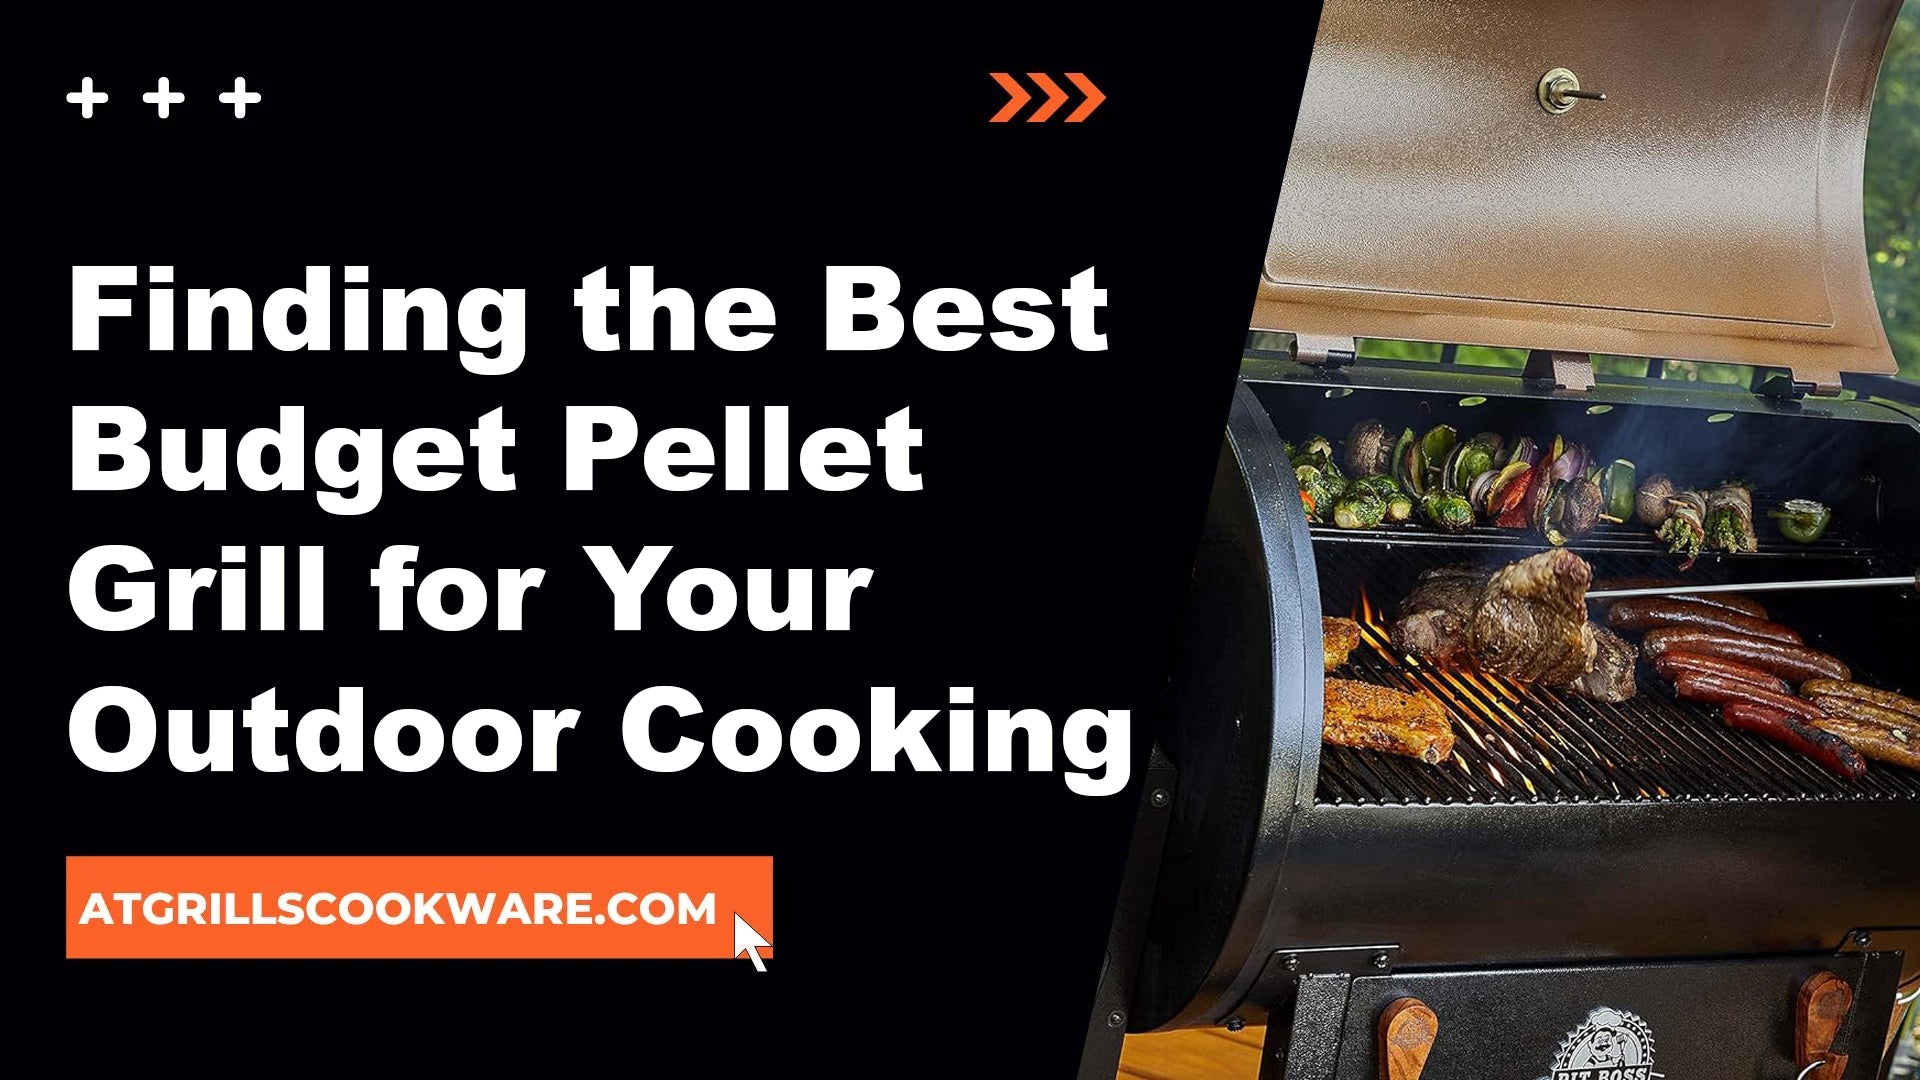 Finding the Best Budget Pellet Grill for Your Outdoor Cooking